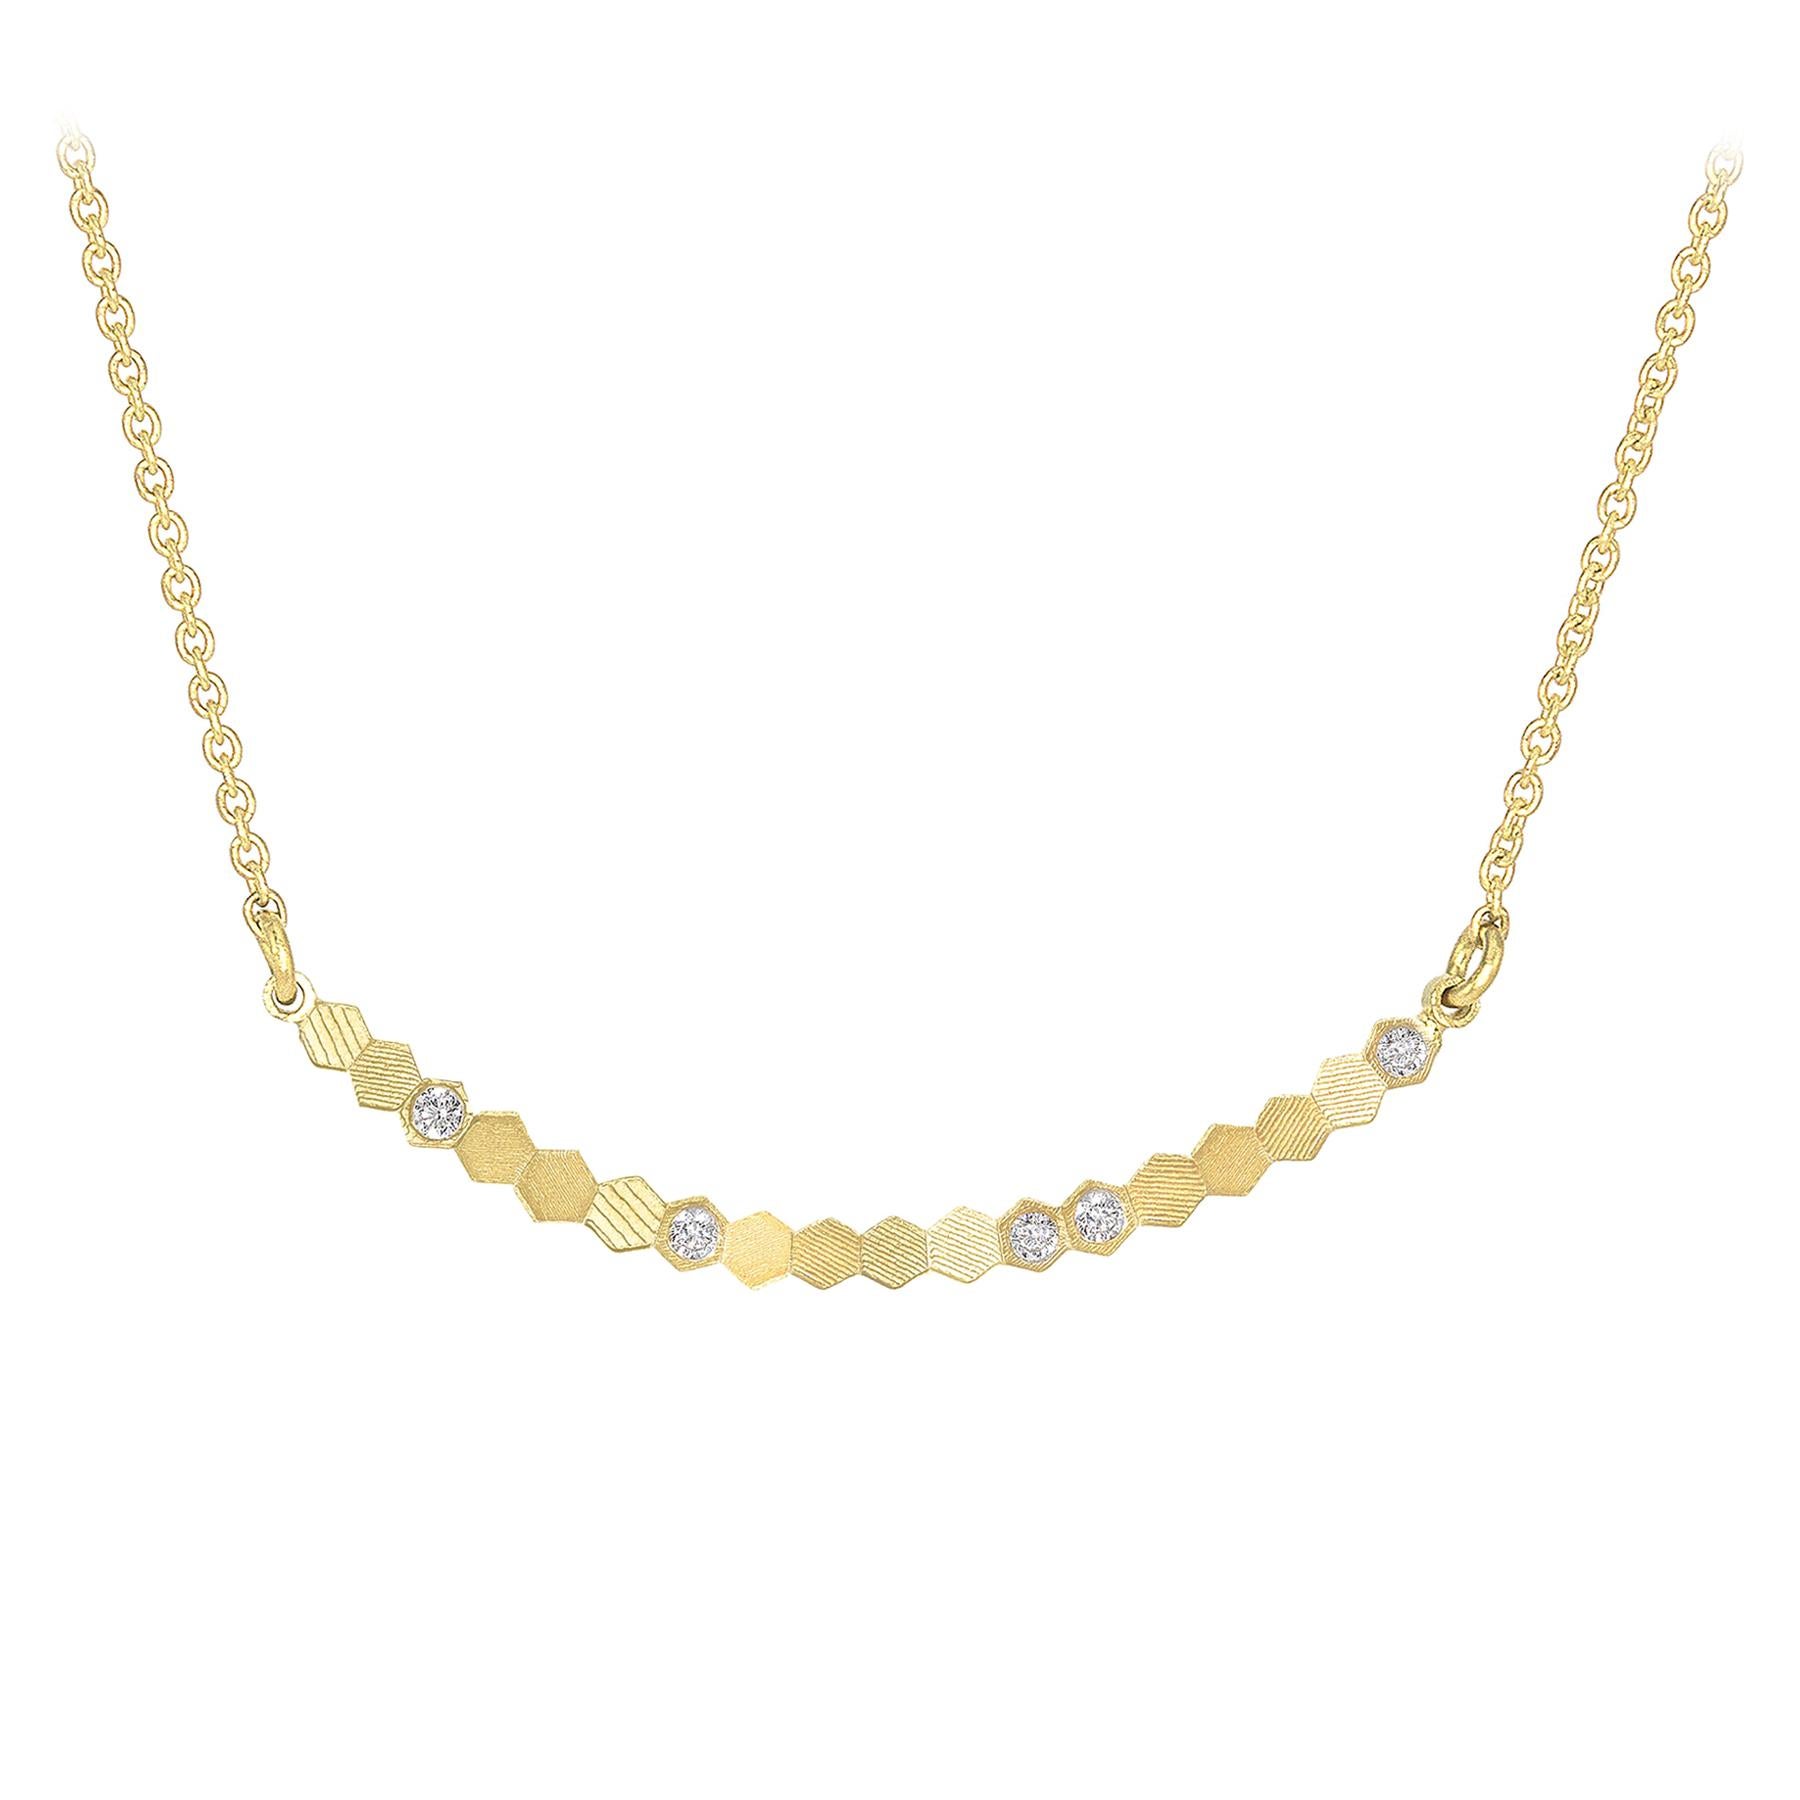 Jo Hayes Ward White Diamond Reflective Yellow Gold Curved Bar Necklace